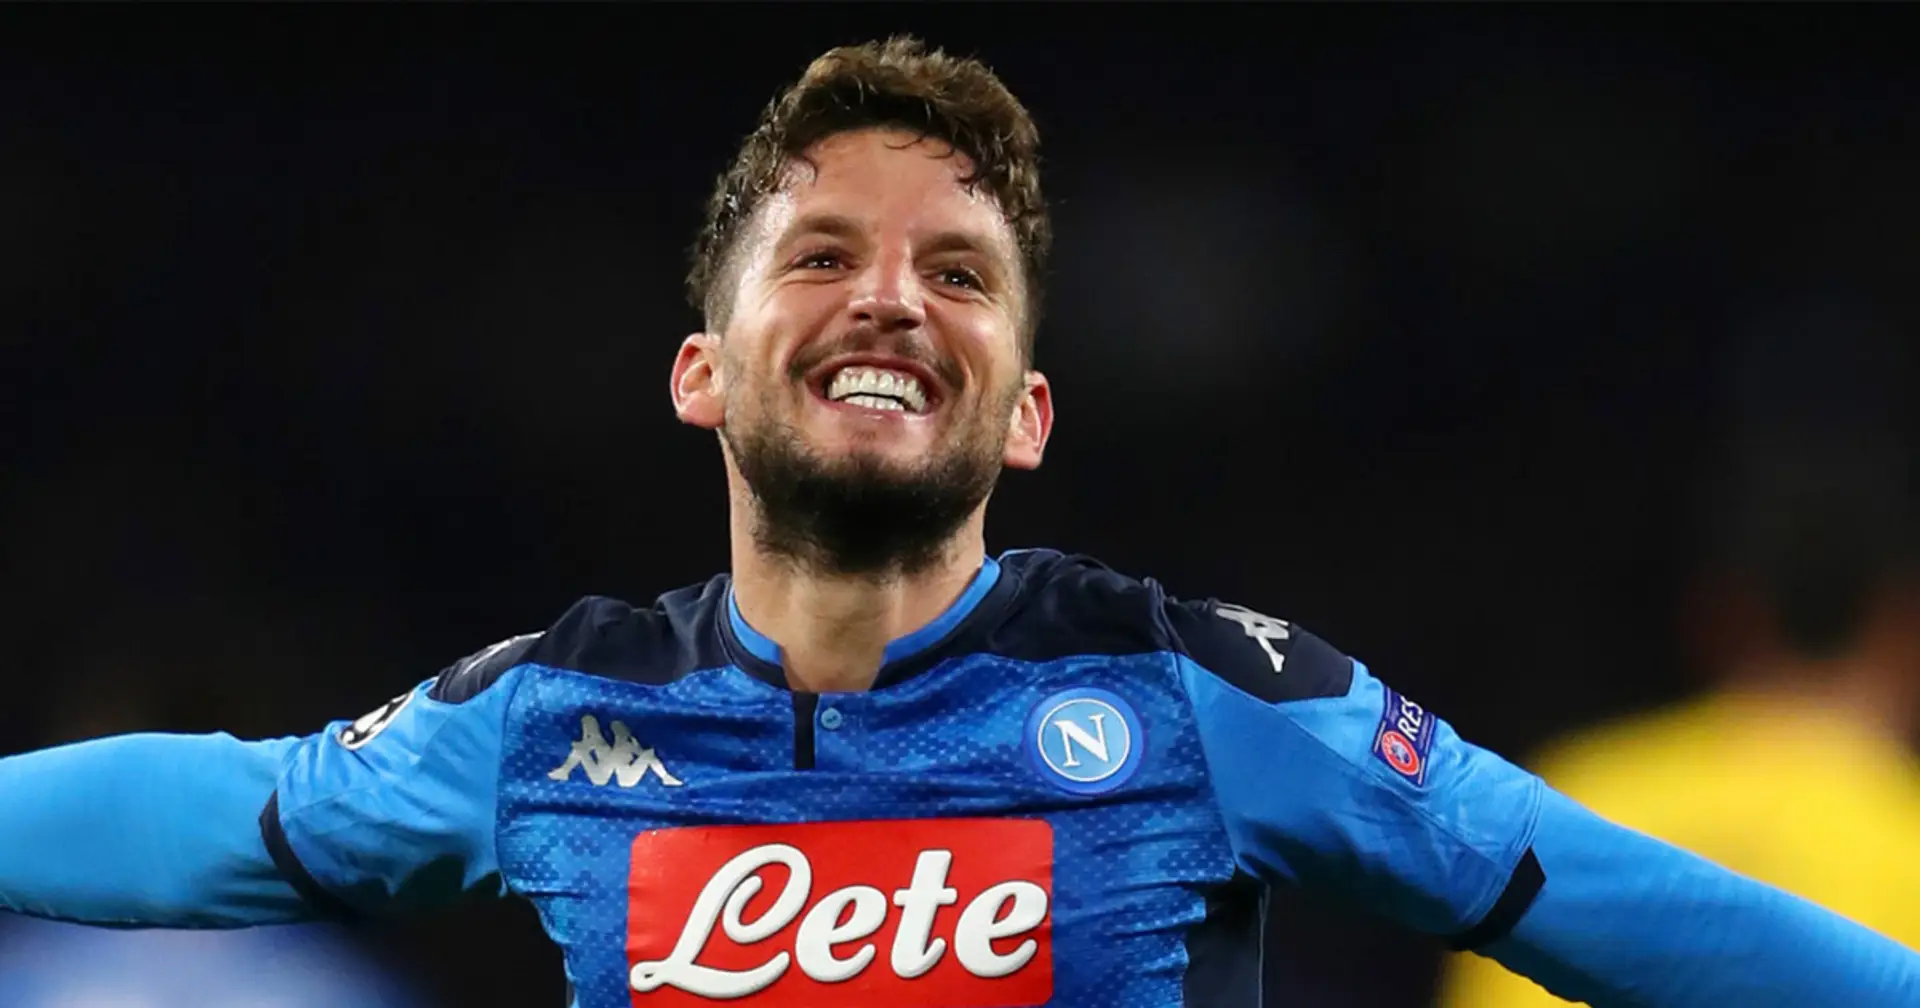 Mertens says Napoli are confident they can get 'historic result' by beating Barca